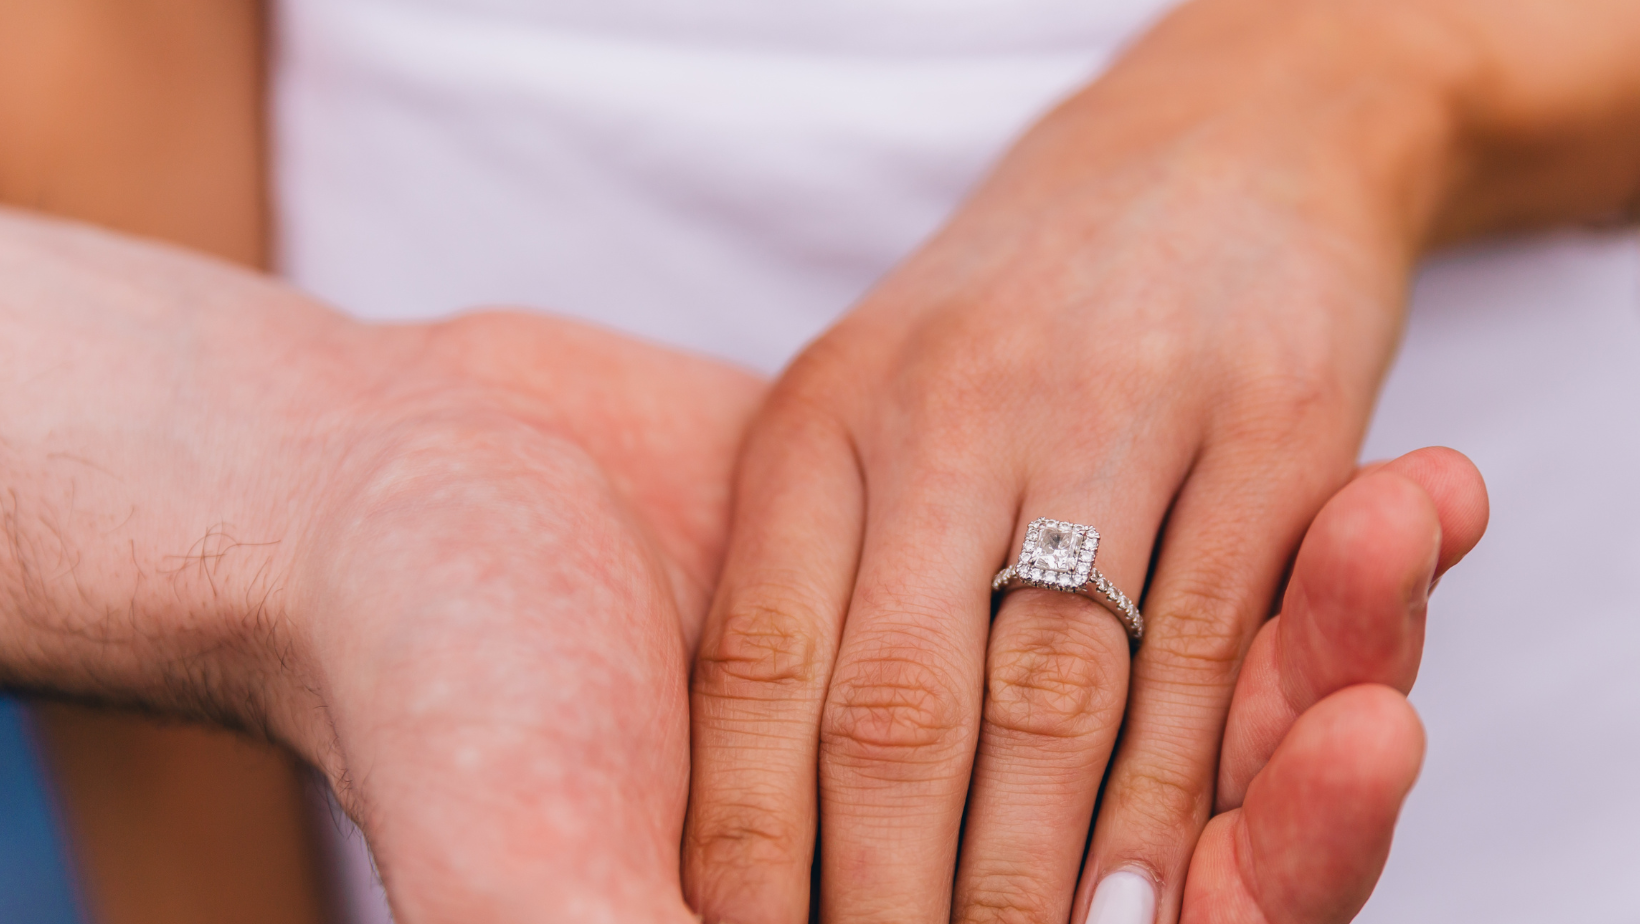 The Ultimate Guide To Buy Small Diamond Ring - Tips & Tricks For Finding The Perfect Piece